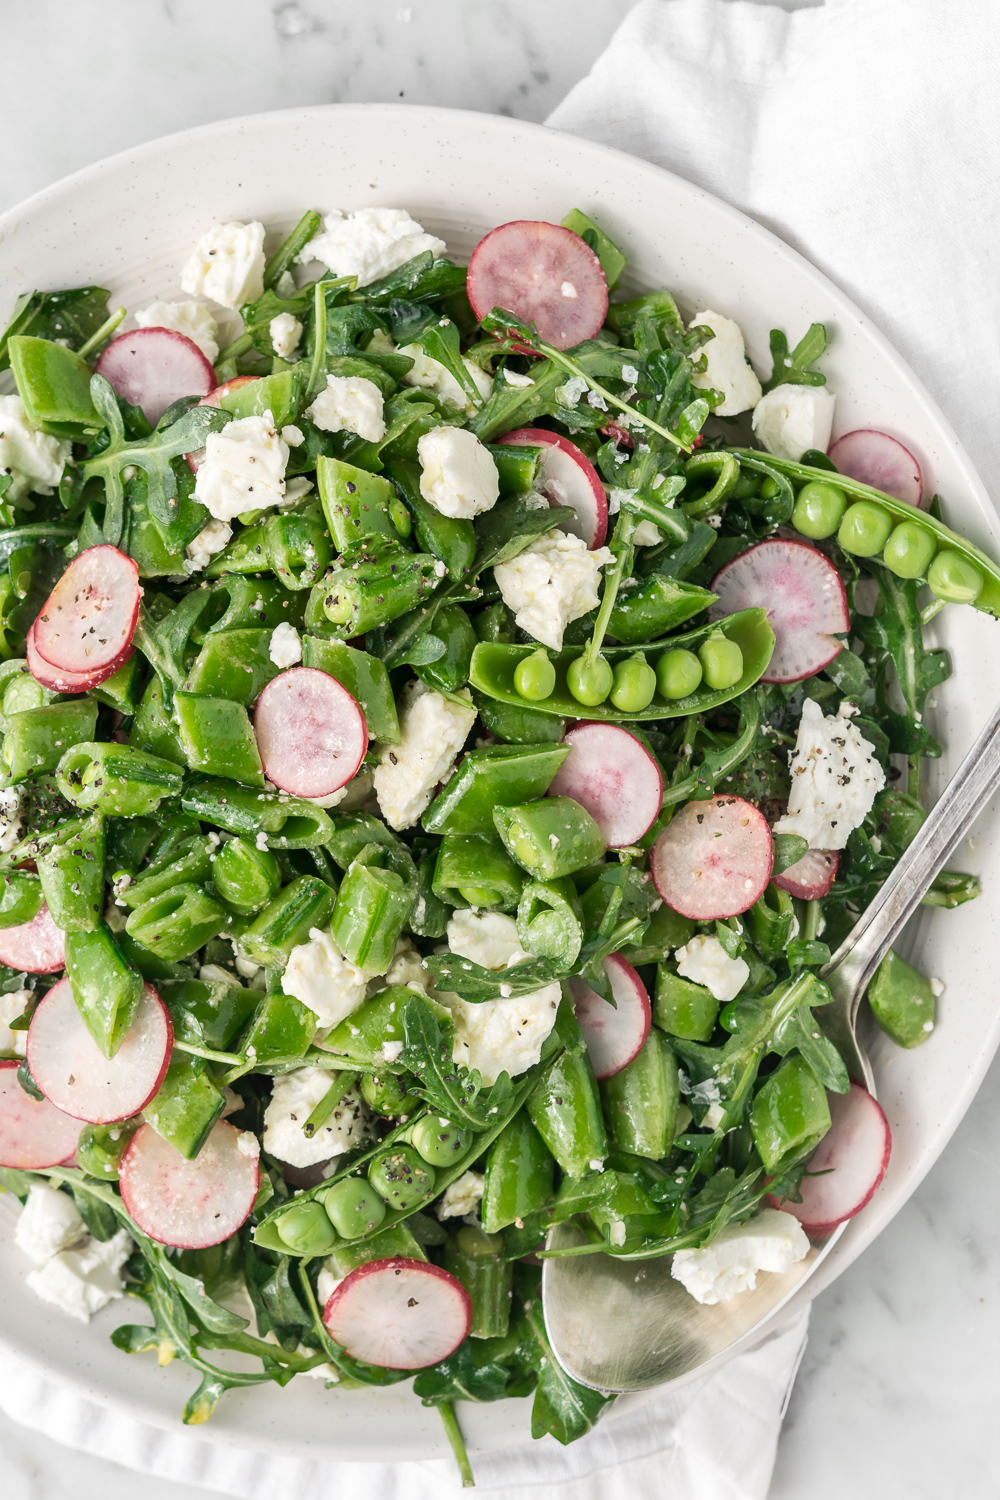 https://www.withspice.com/wp-content/uploads/2020/02/sugar-snap-pea-salad-with-radishes-feta-and-arugula.jpg